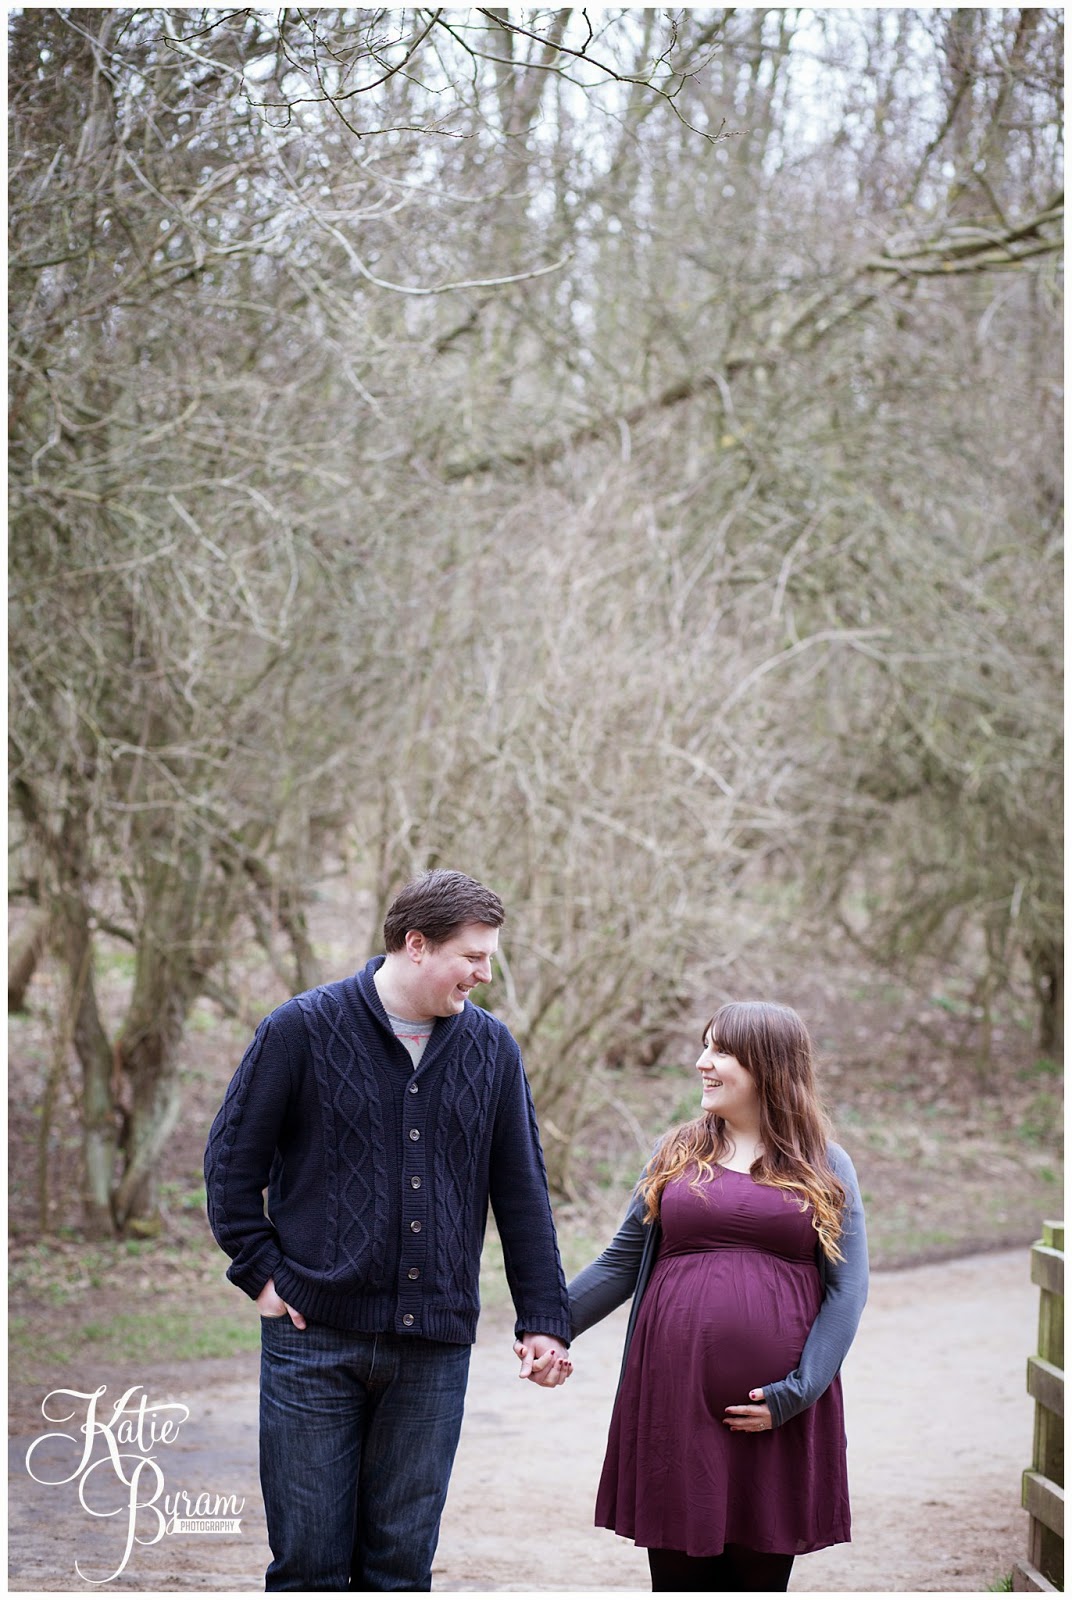 maternity photoshoot, maternity photos, northumberland photoshoot, maternity photography, katie byram photography, woodland maternity shoot, converse, mum and dad to be, coming soon, pregnancy photographs